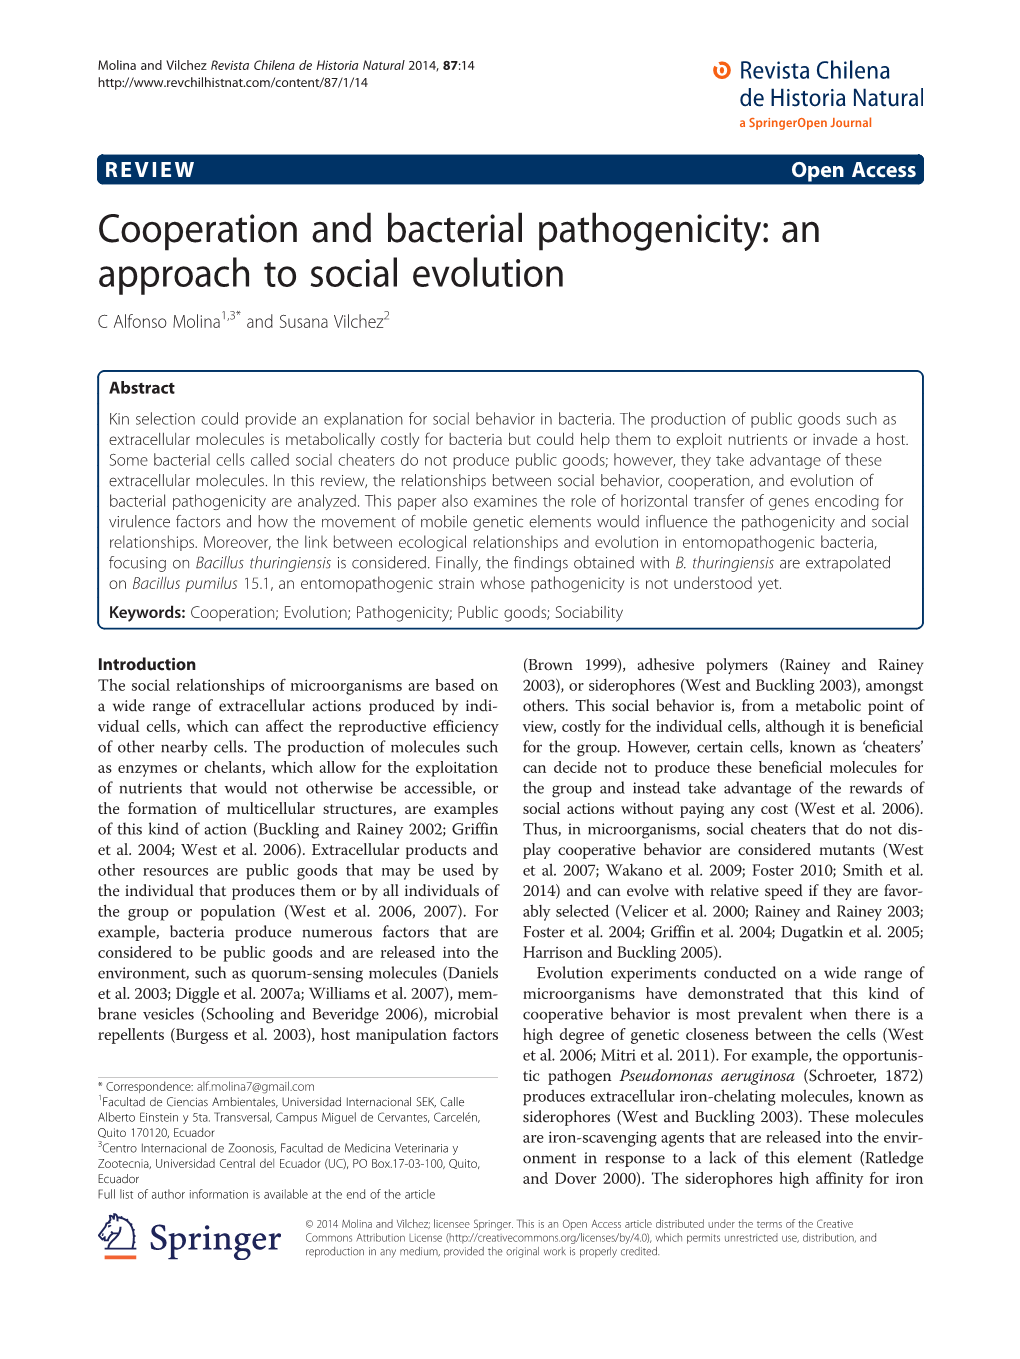 Cooperation and Bacterial Pathogenicity: an Approach to Social Evolution C Alfonso Molina1,3* and Susana Vilchez2